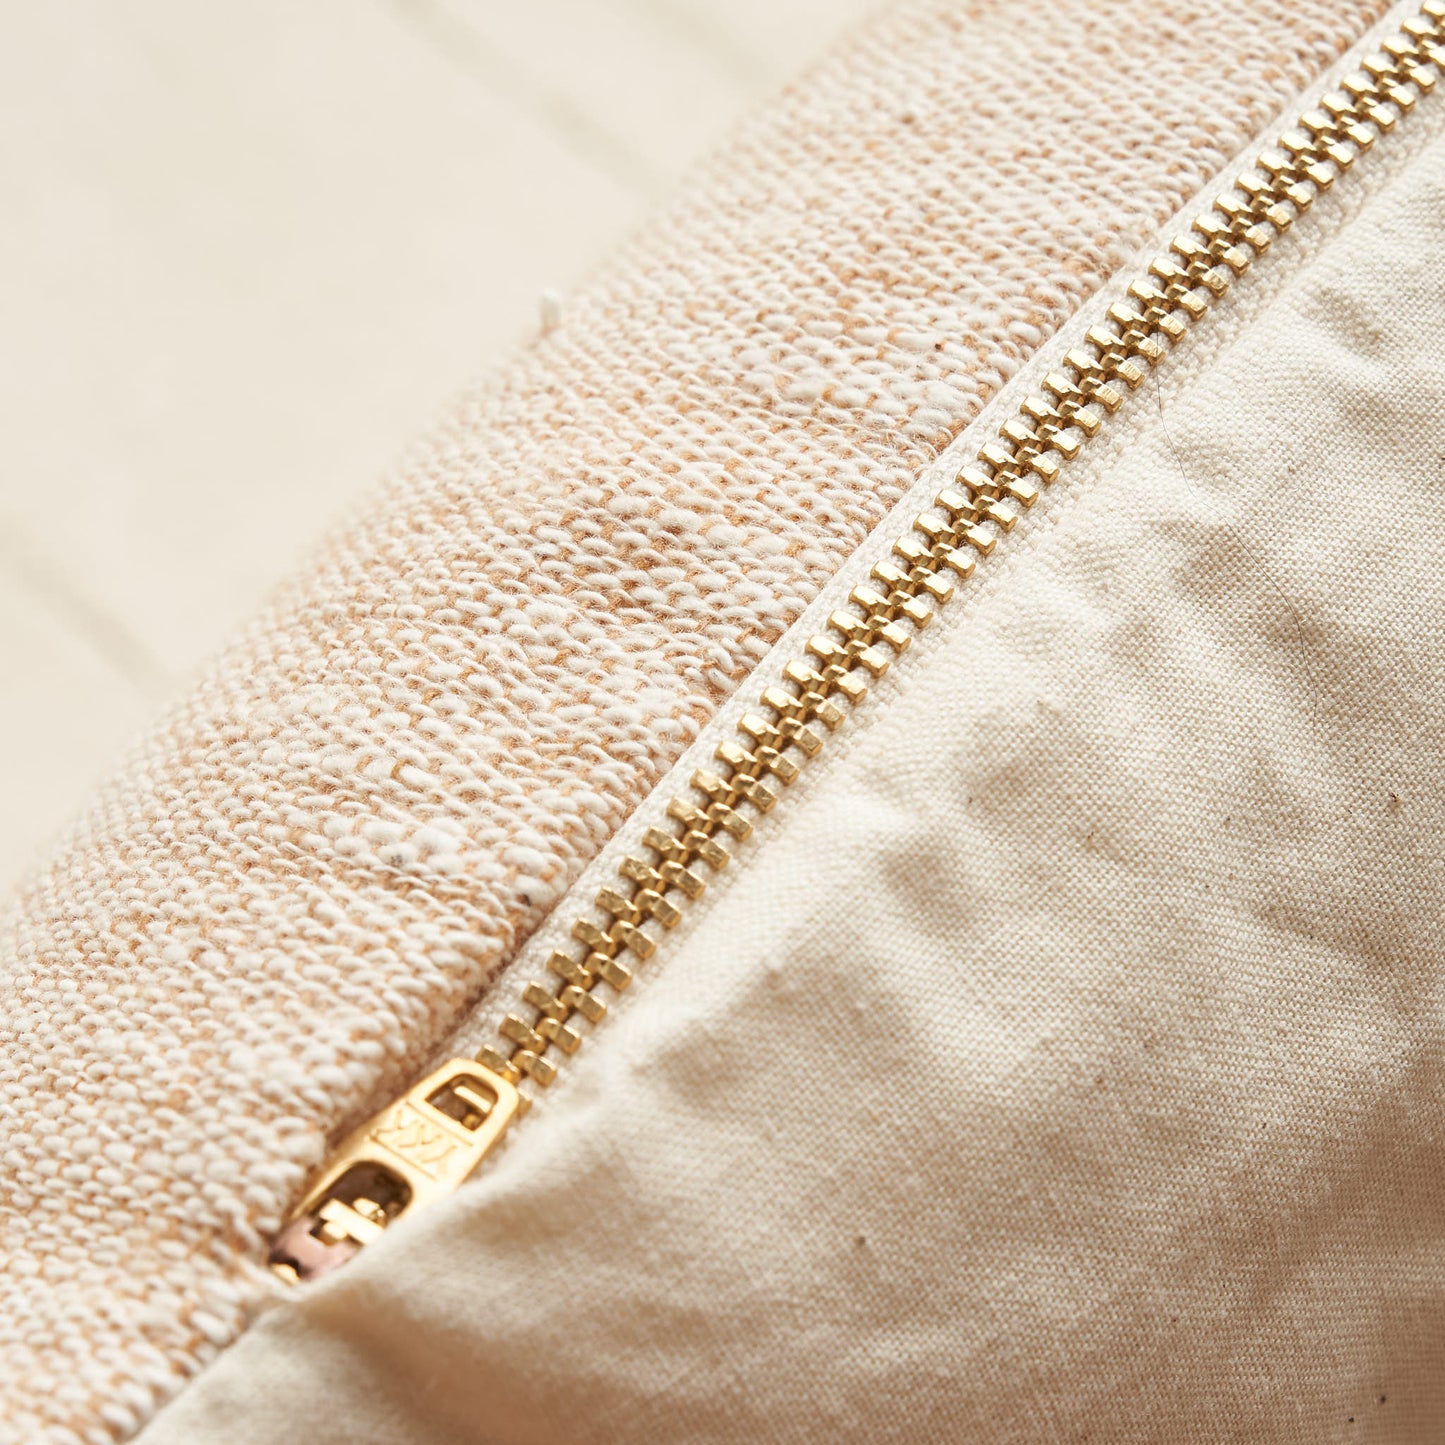 Housework-Exclusive Organic Cotton Earth Pillow, Undyed Sand